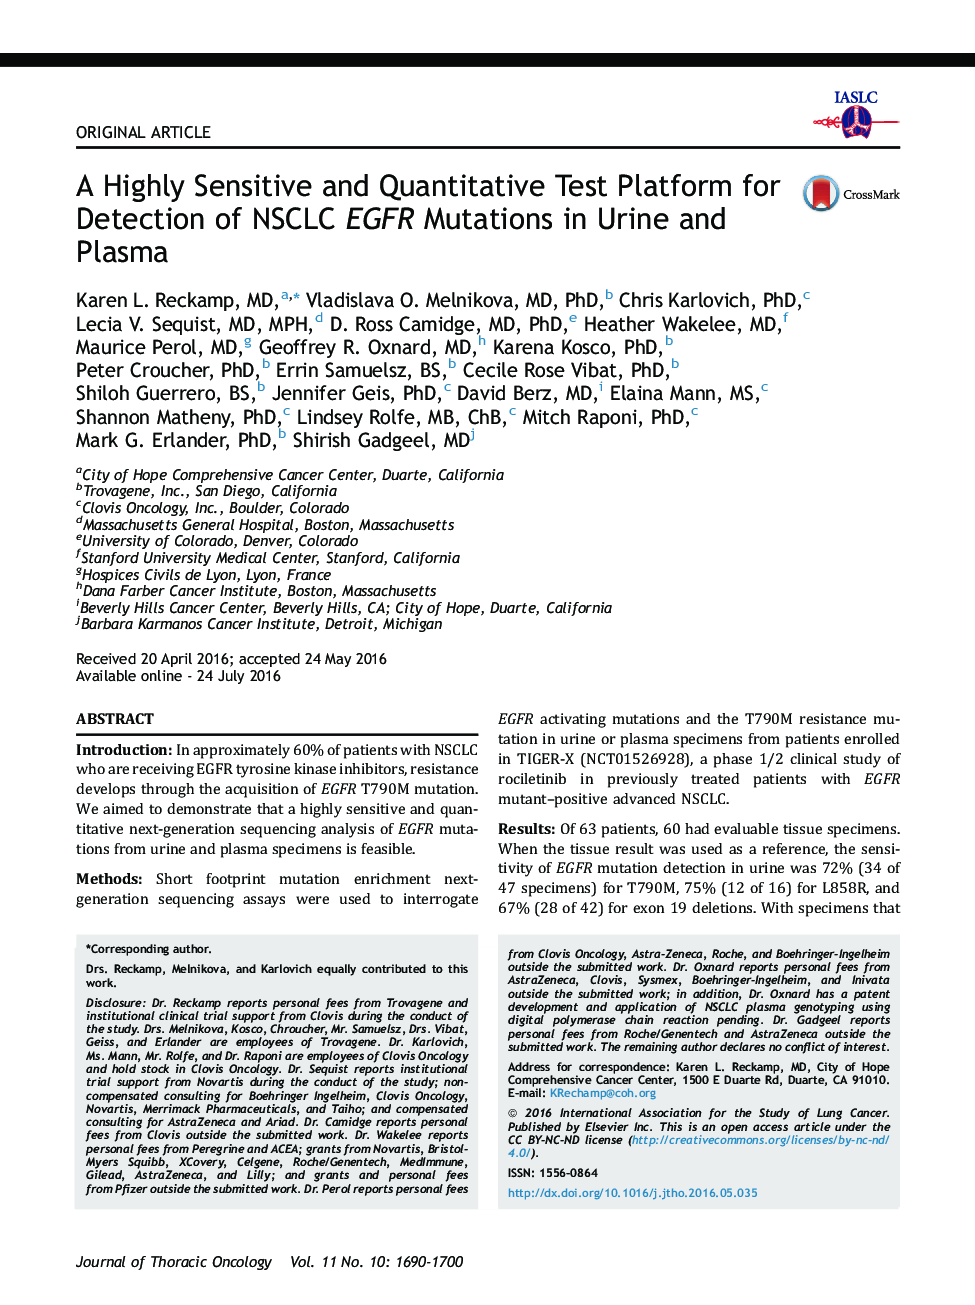 A Highly Sensitive and Quantitative Test Platform for Detection of NSCLC EGFR Mutations in Urine and Plasma